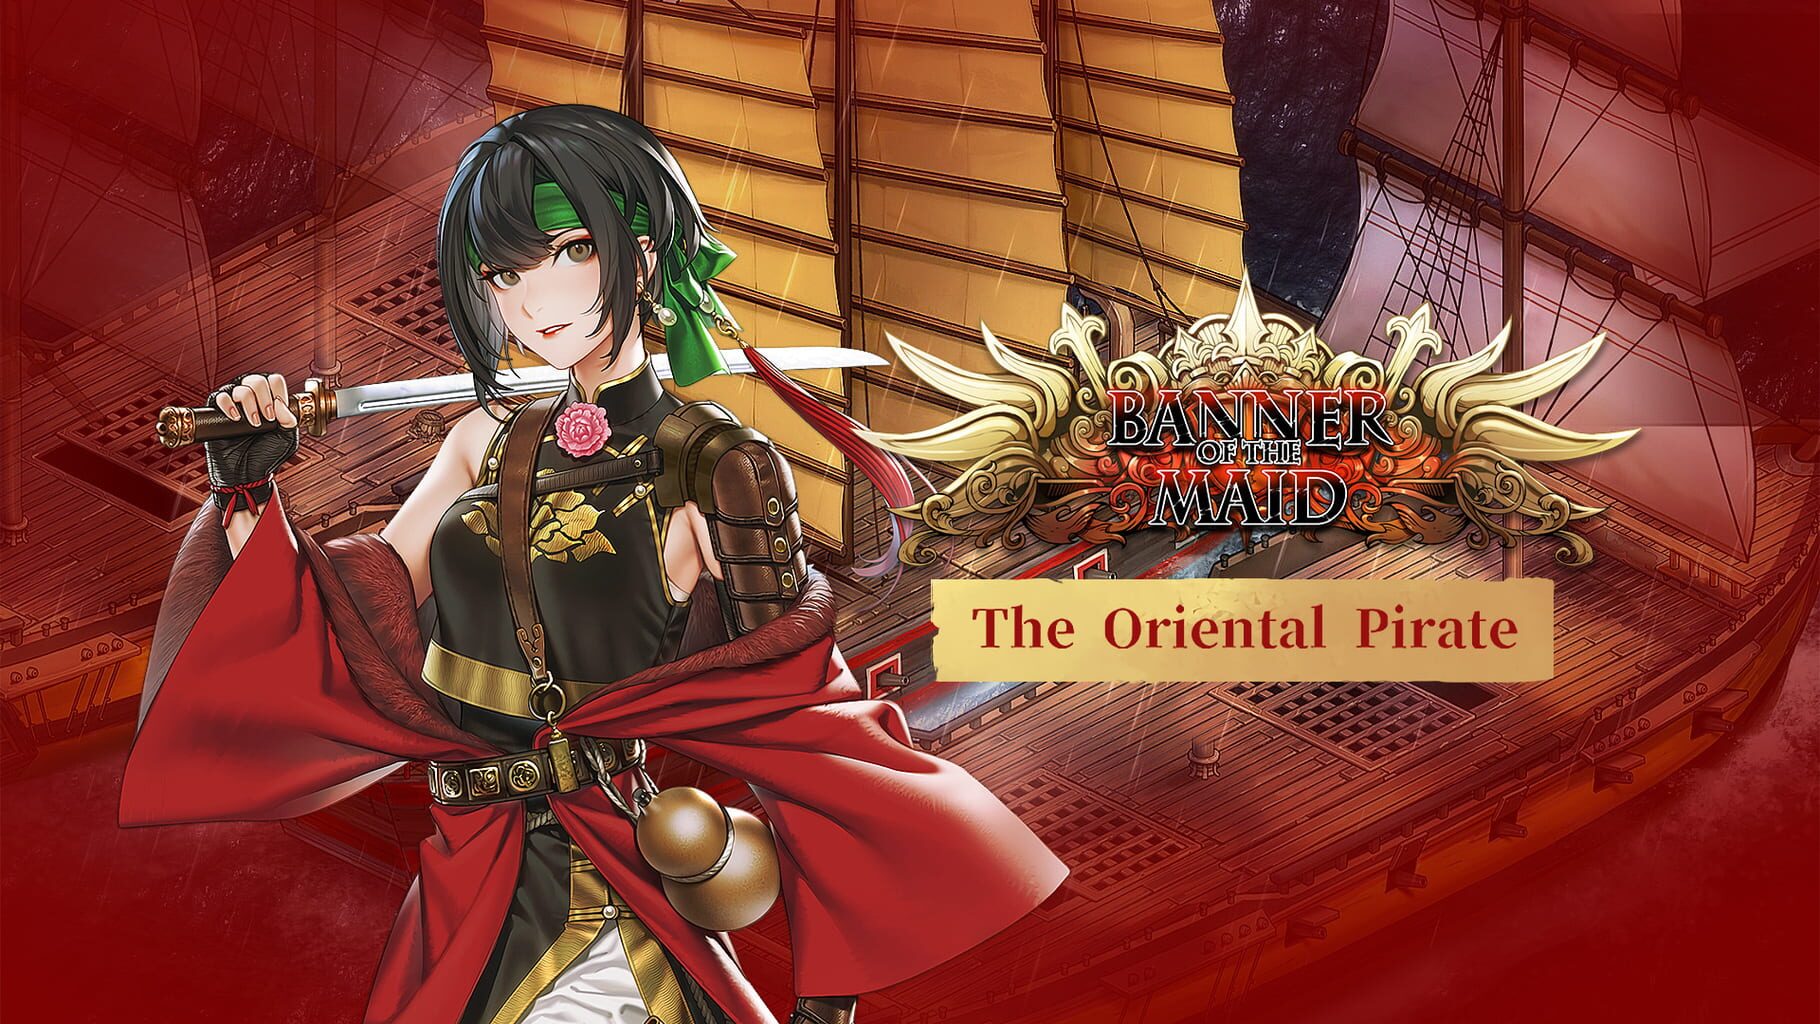 Banner of the Maid: The Oriental Pirate artwork